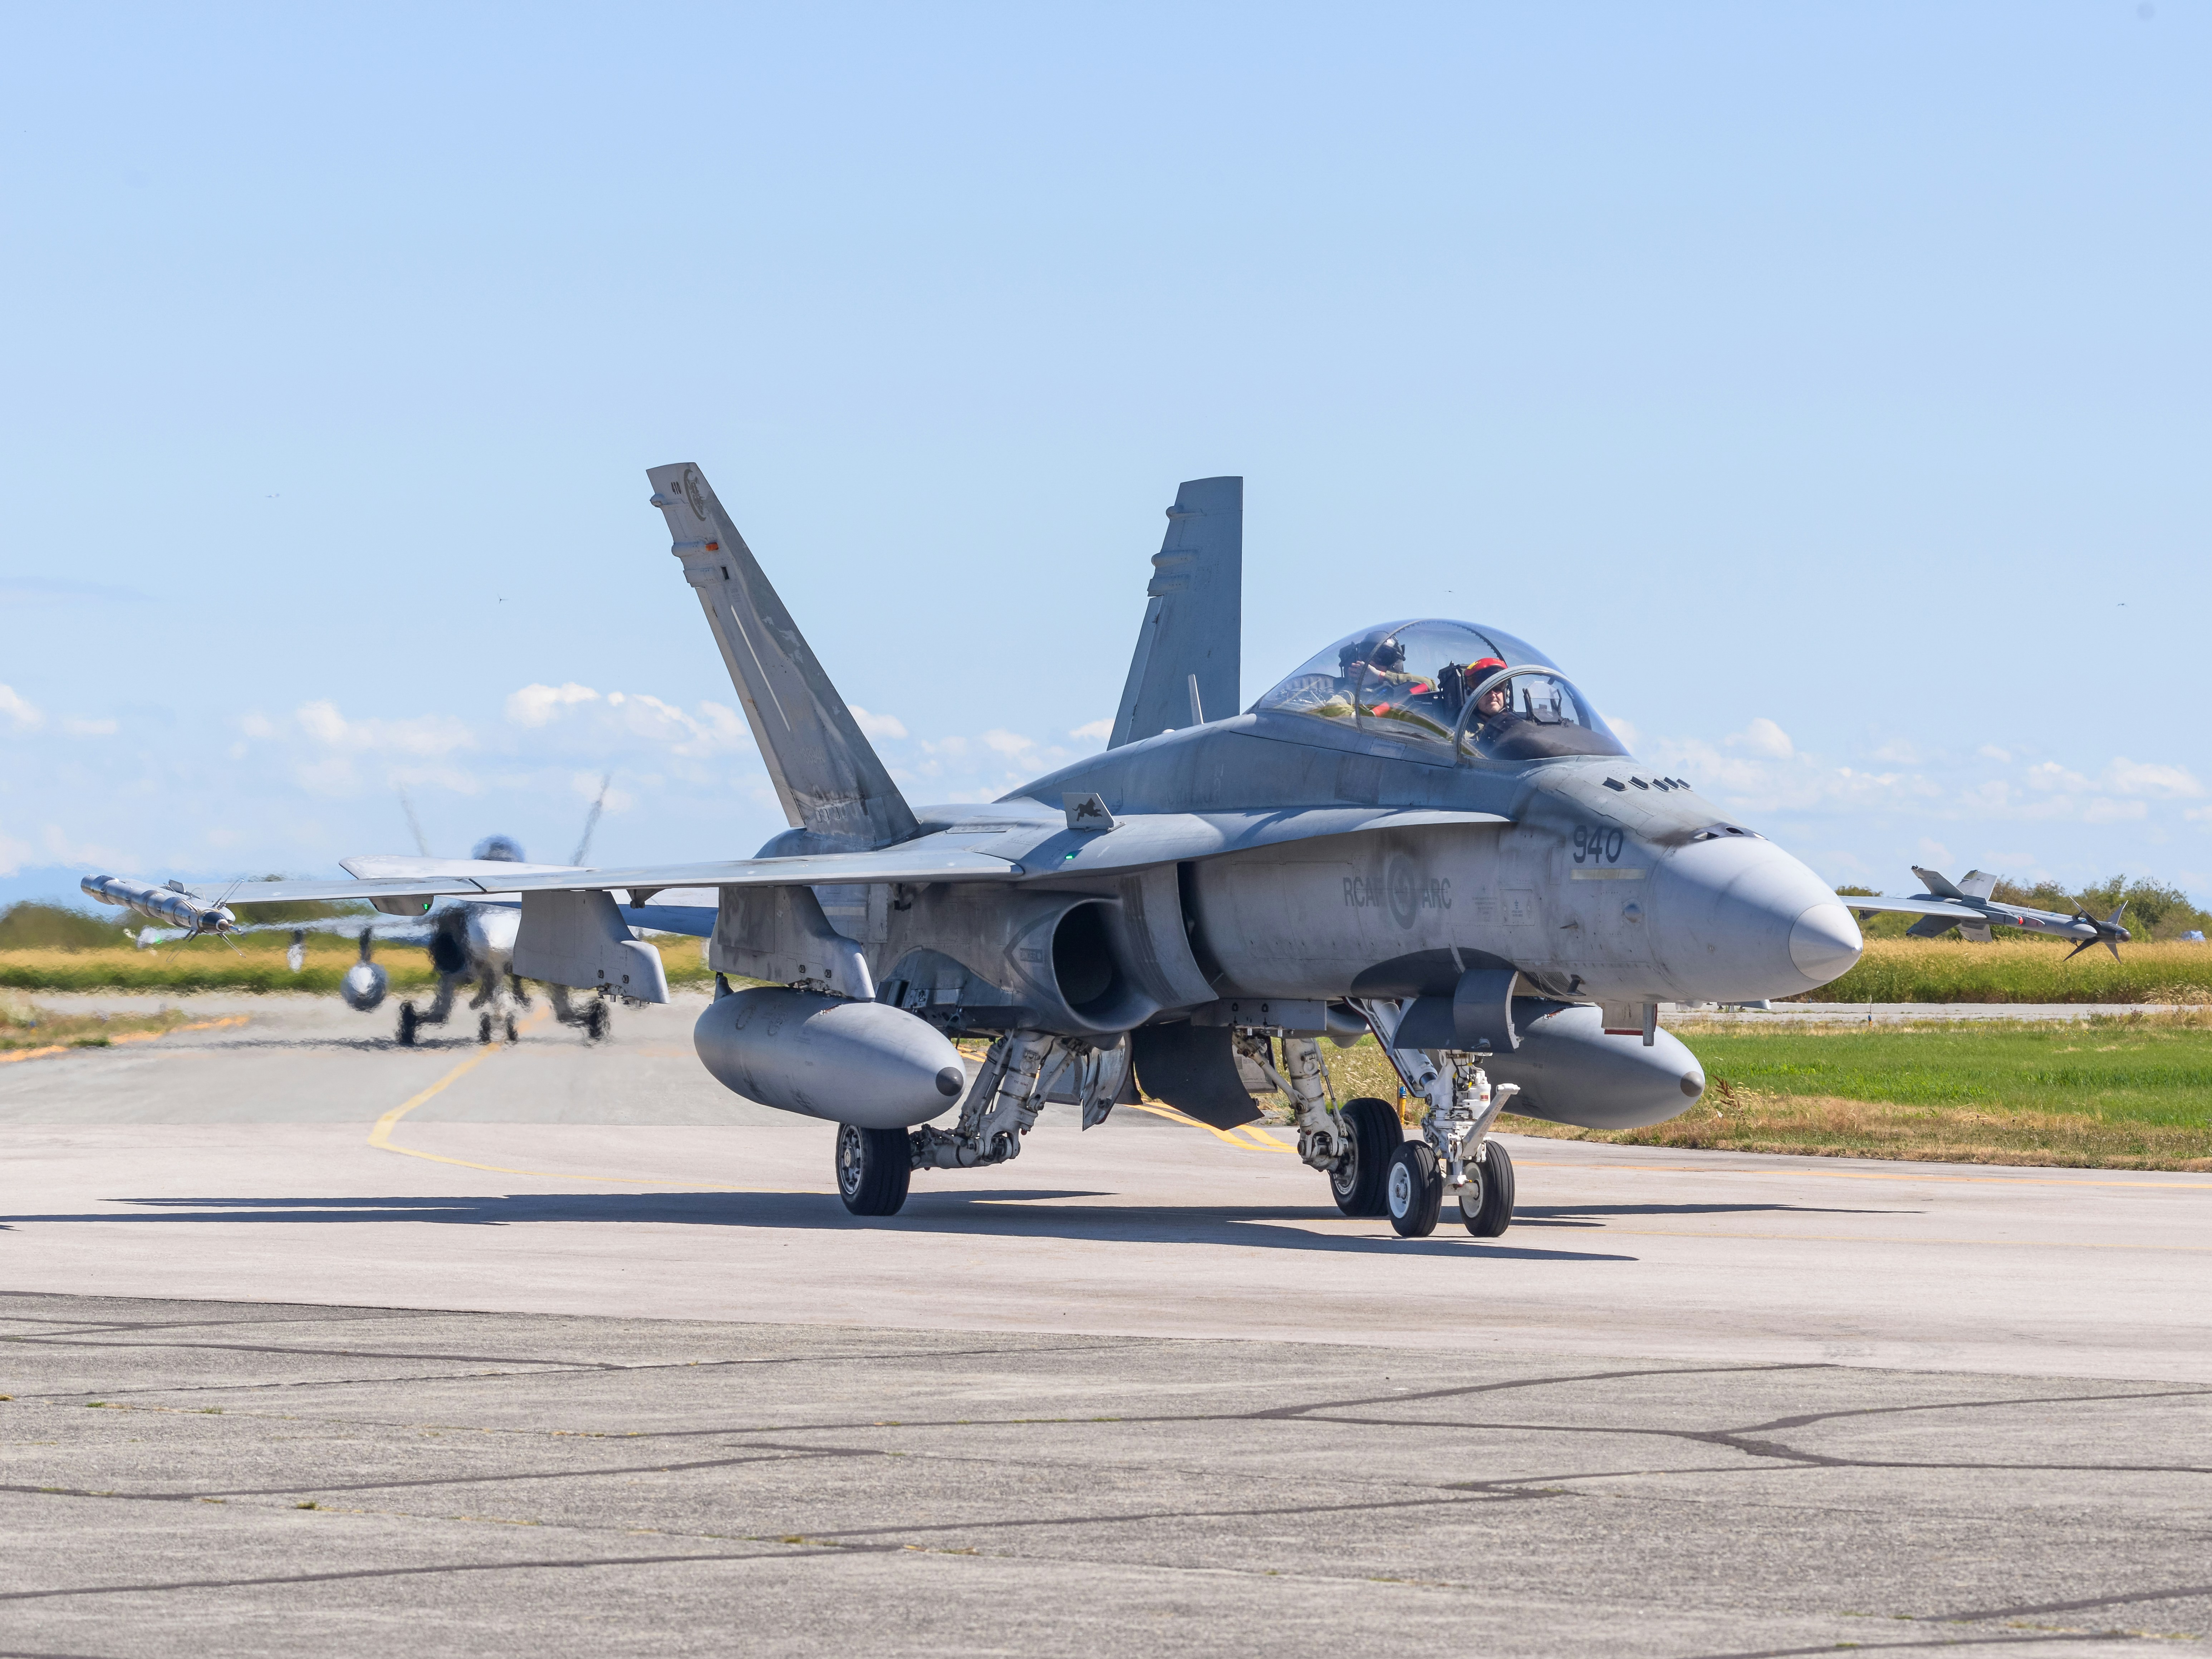 Two CF-18 Hornets taxi'ing from the Runway at the Boundary Bay Airshow